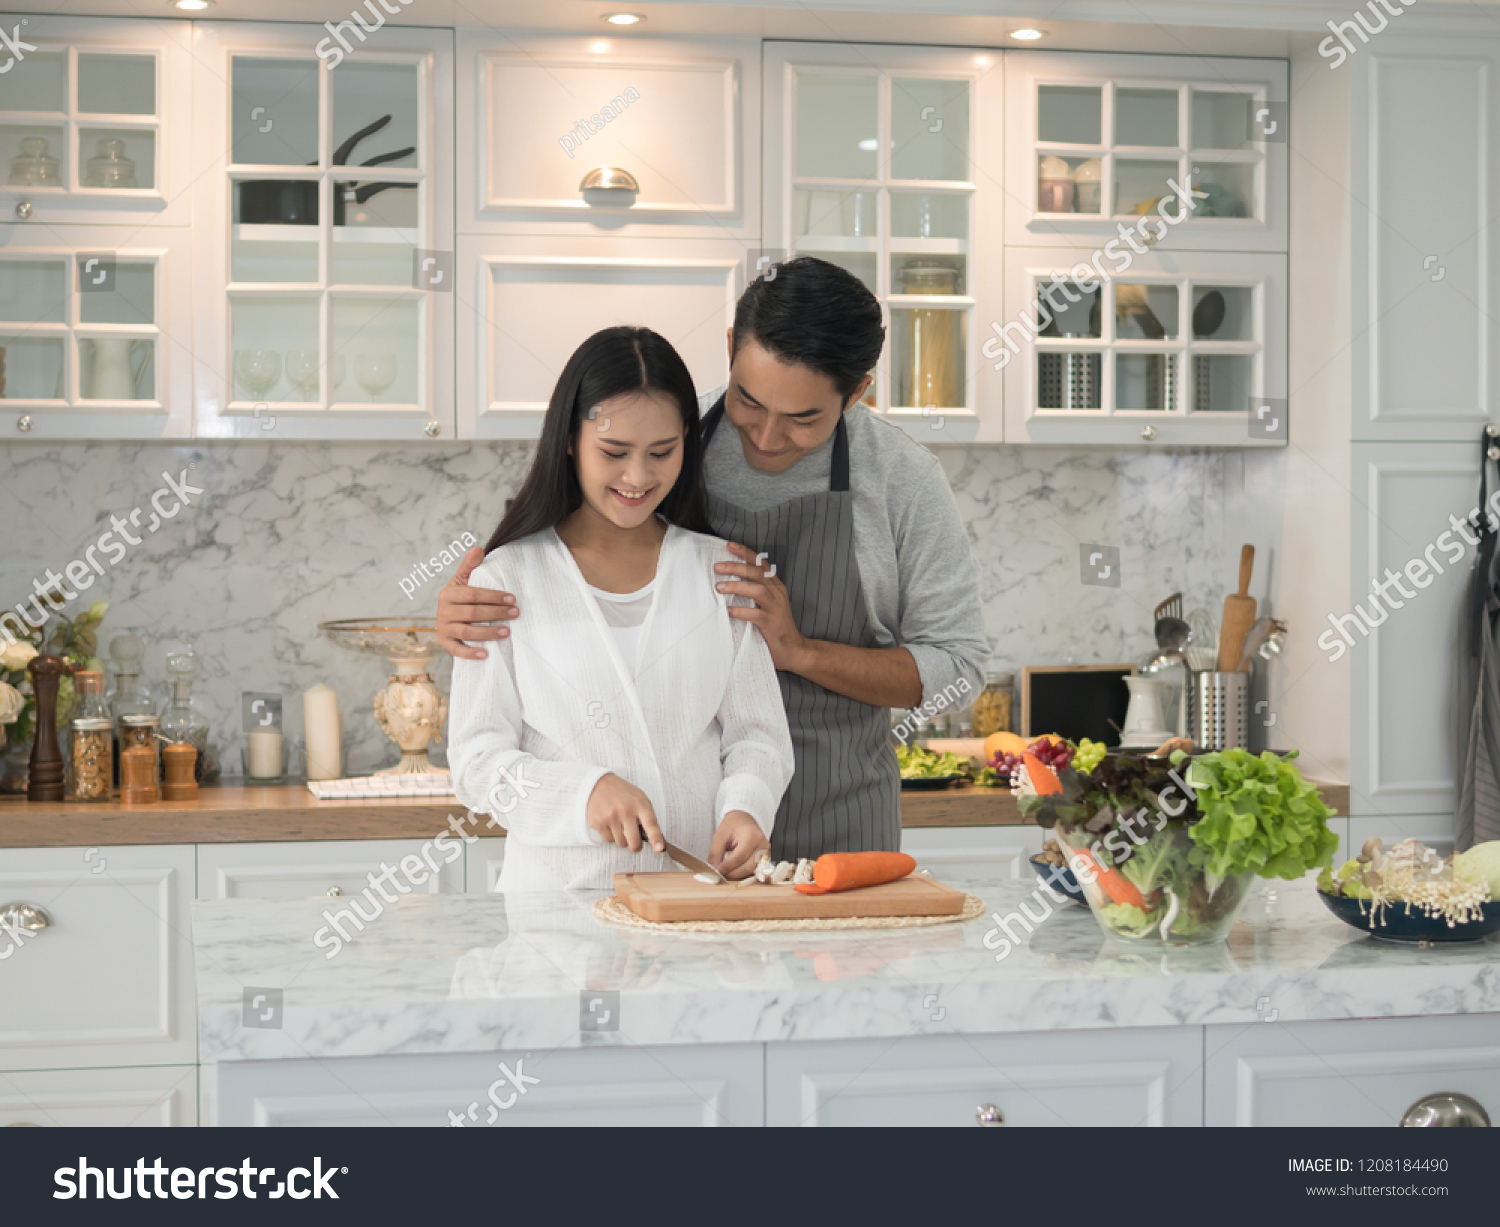 Young asian expecting pregnant couple cooking together in the kitchen at home. Pregnant woman preparing food with her husband.
 #1208184490